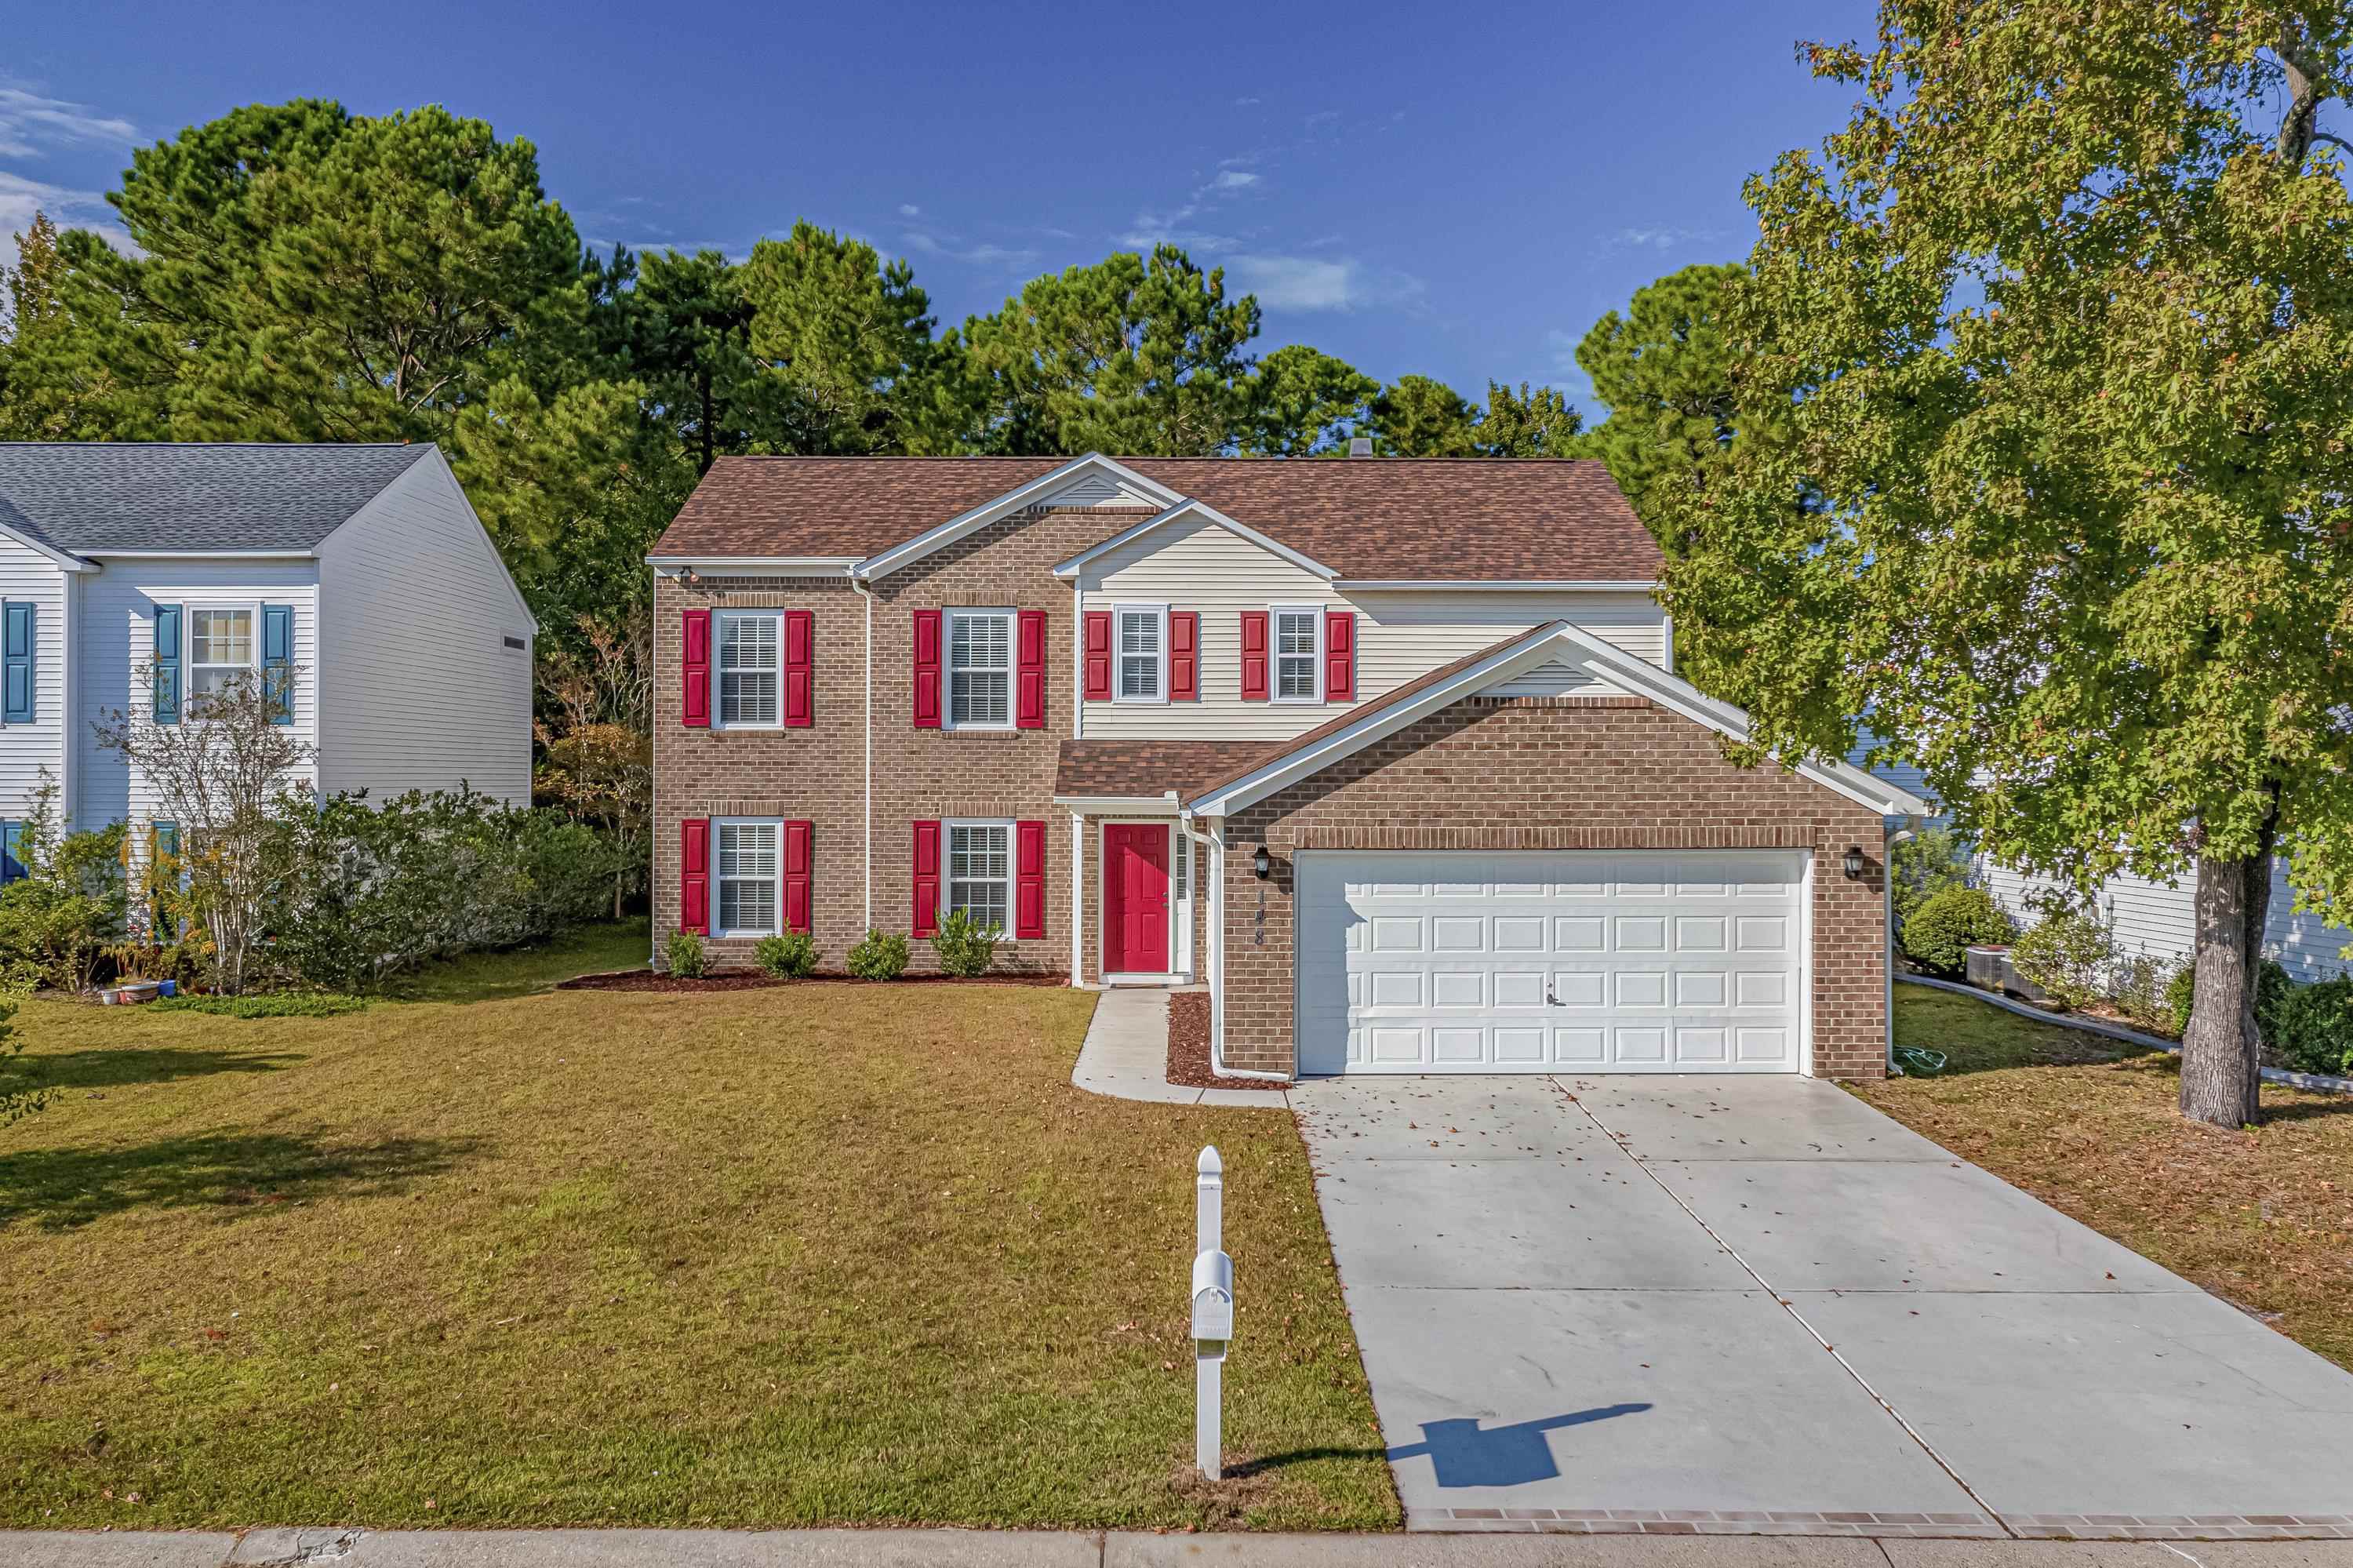 148 Weeping Willow Dr. Myrtle Beach, SC 29579